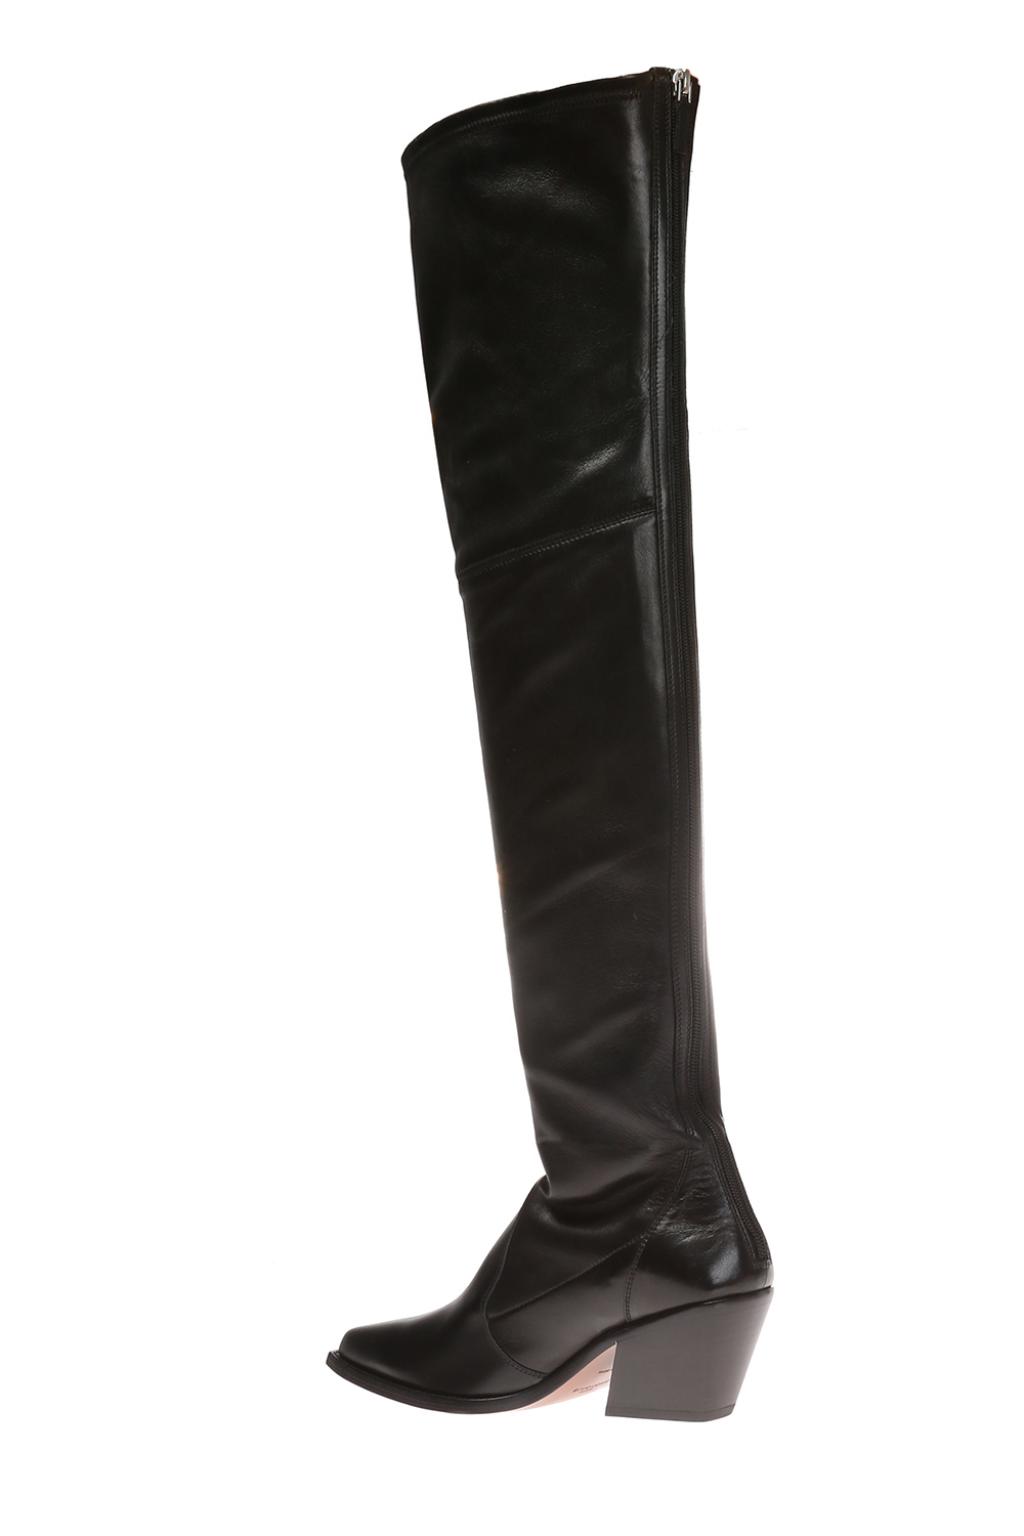 givenchy boots over the knee